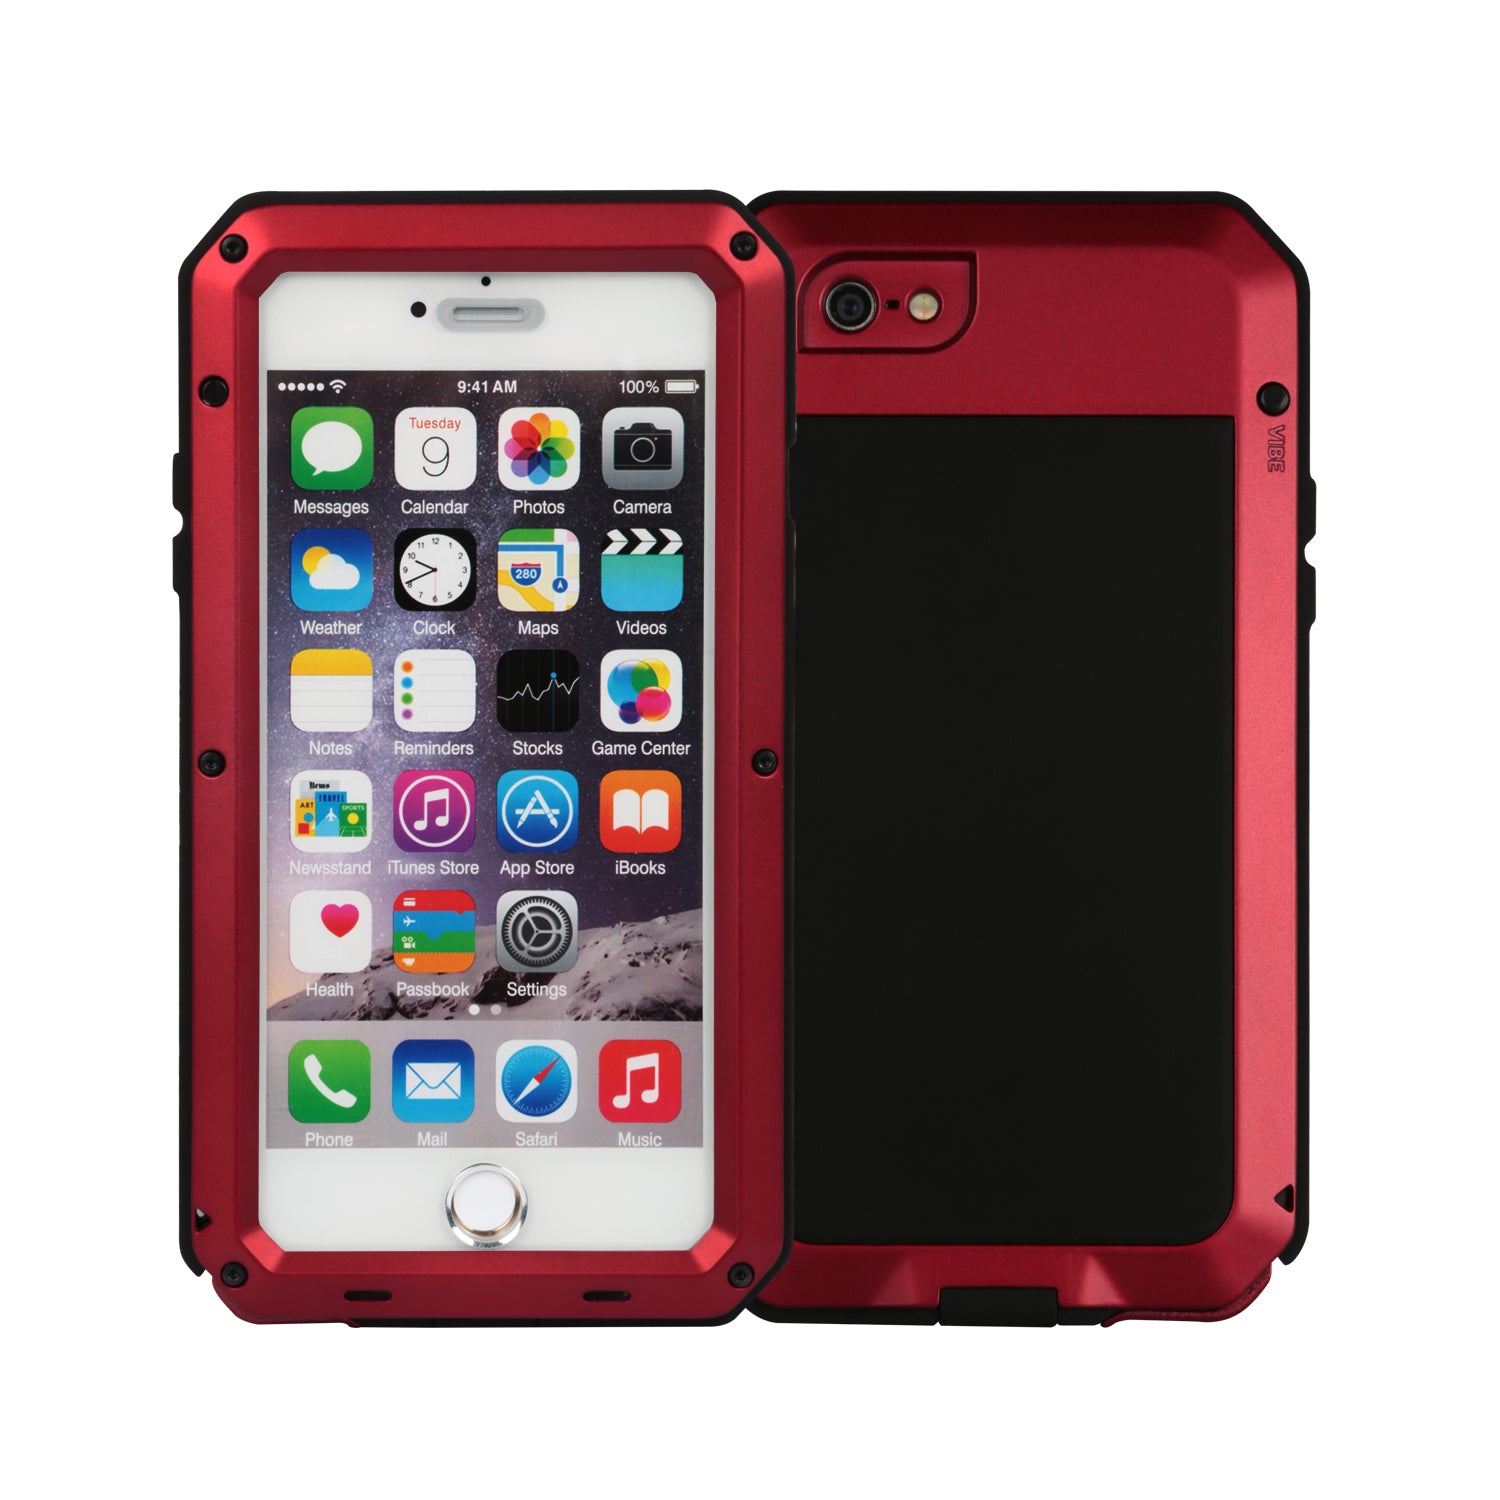 title:Rugged Shock-Resistant Hybrid Full Cover Case For iPhone 6 Plus;color:Red